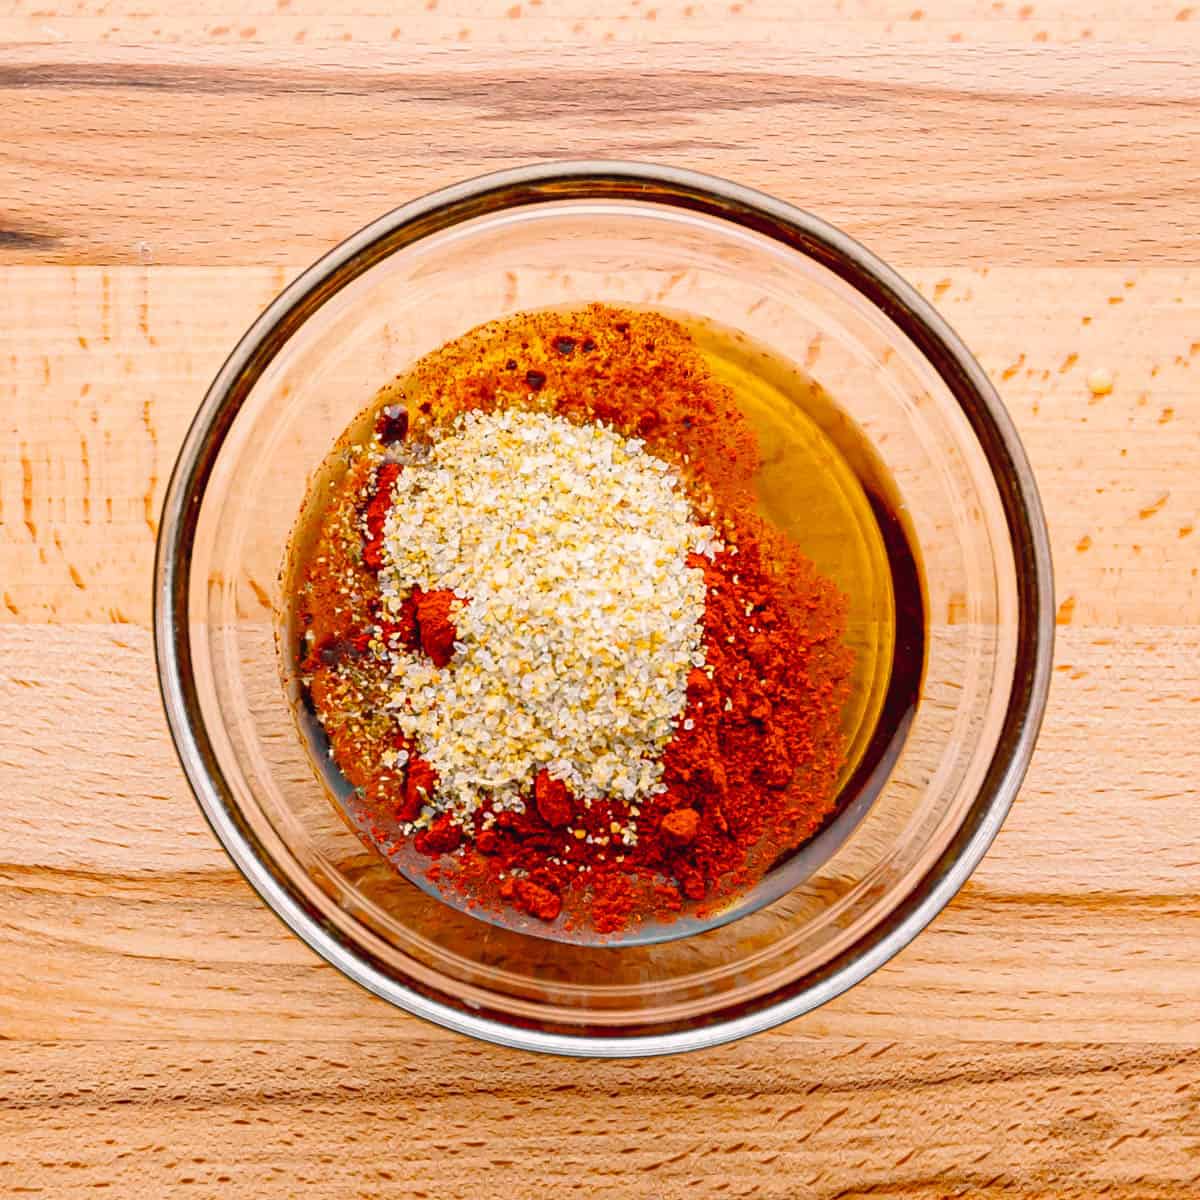 In a mixing bowl, combine the smoked paprika, garlic salt, and olive oil to create a flavorful marinade.